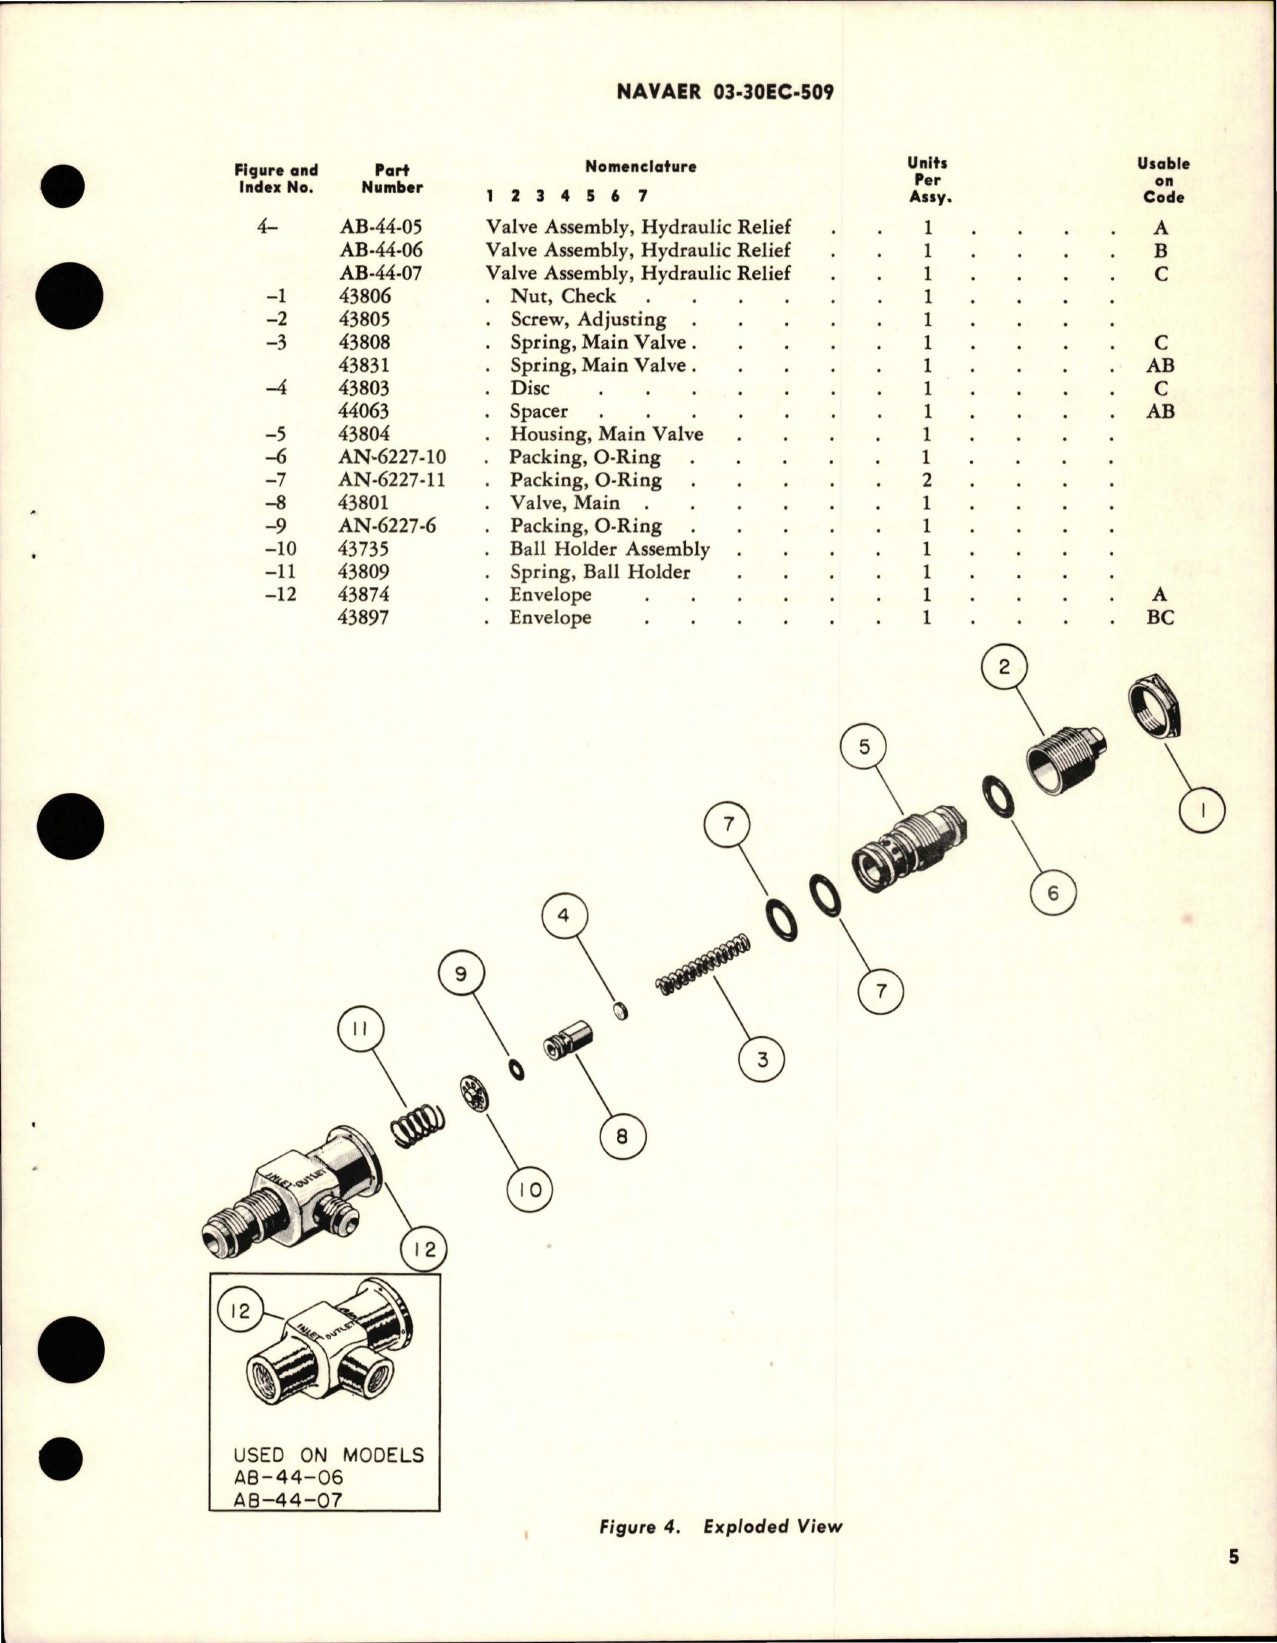 Sample page 5 from AirCorps Library document: Overhaul Instructions with Parts Breakdown for Hydraulic Pressure Relief Valve - AB-44-05, AB-44-06, and AB-44-07